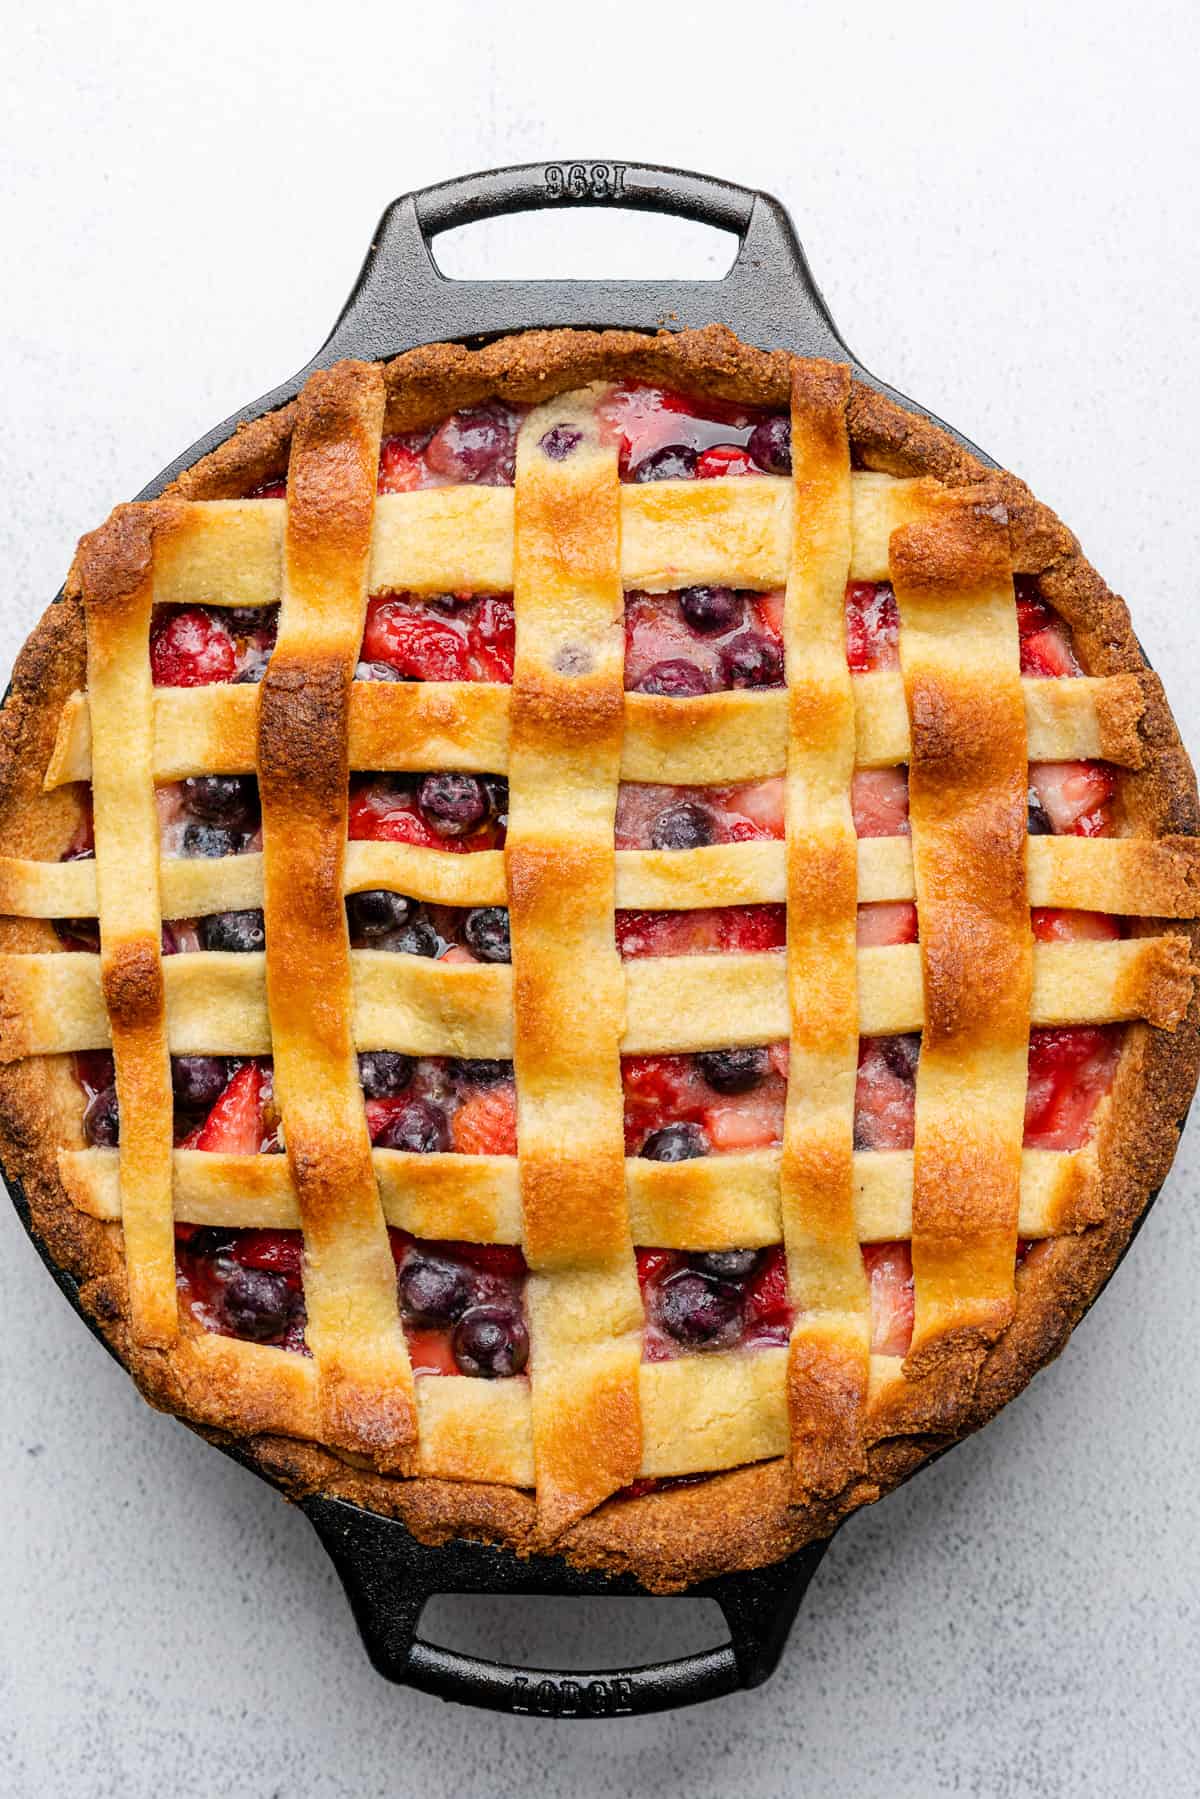 baked strawberry blueberry pie with a lattice design top in a cast iron skillet